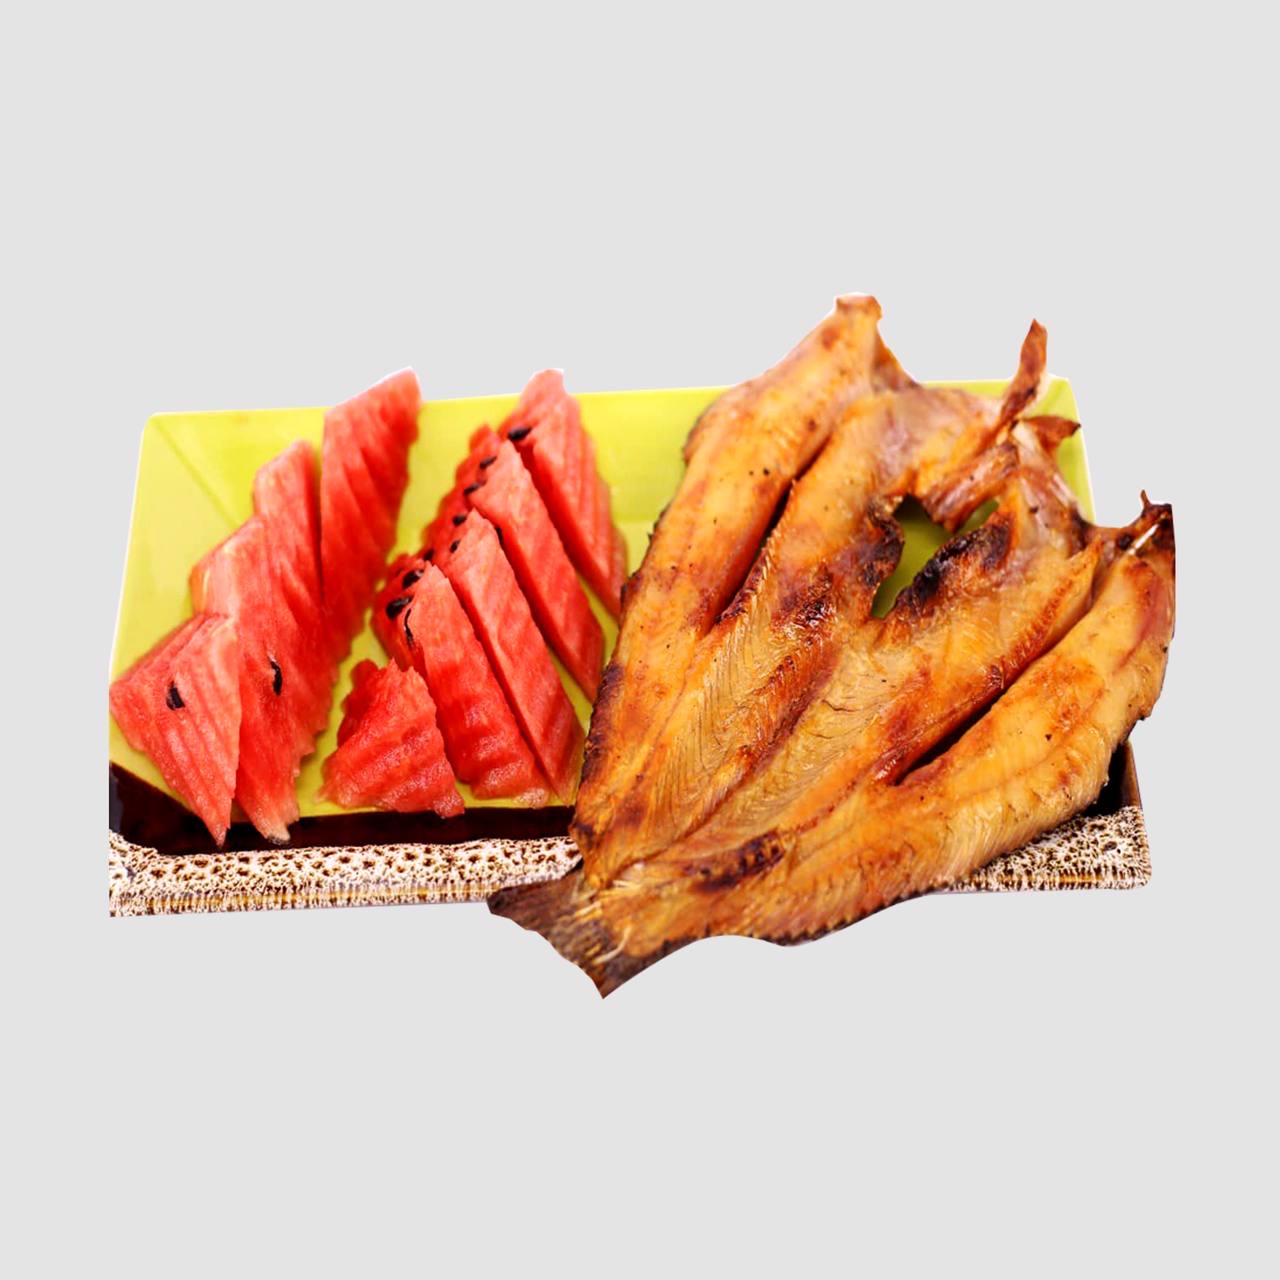 55.Fried fish with watermelon